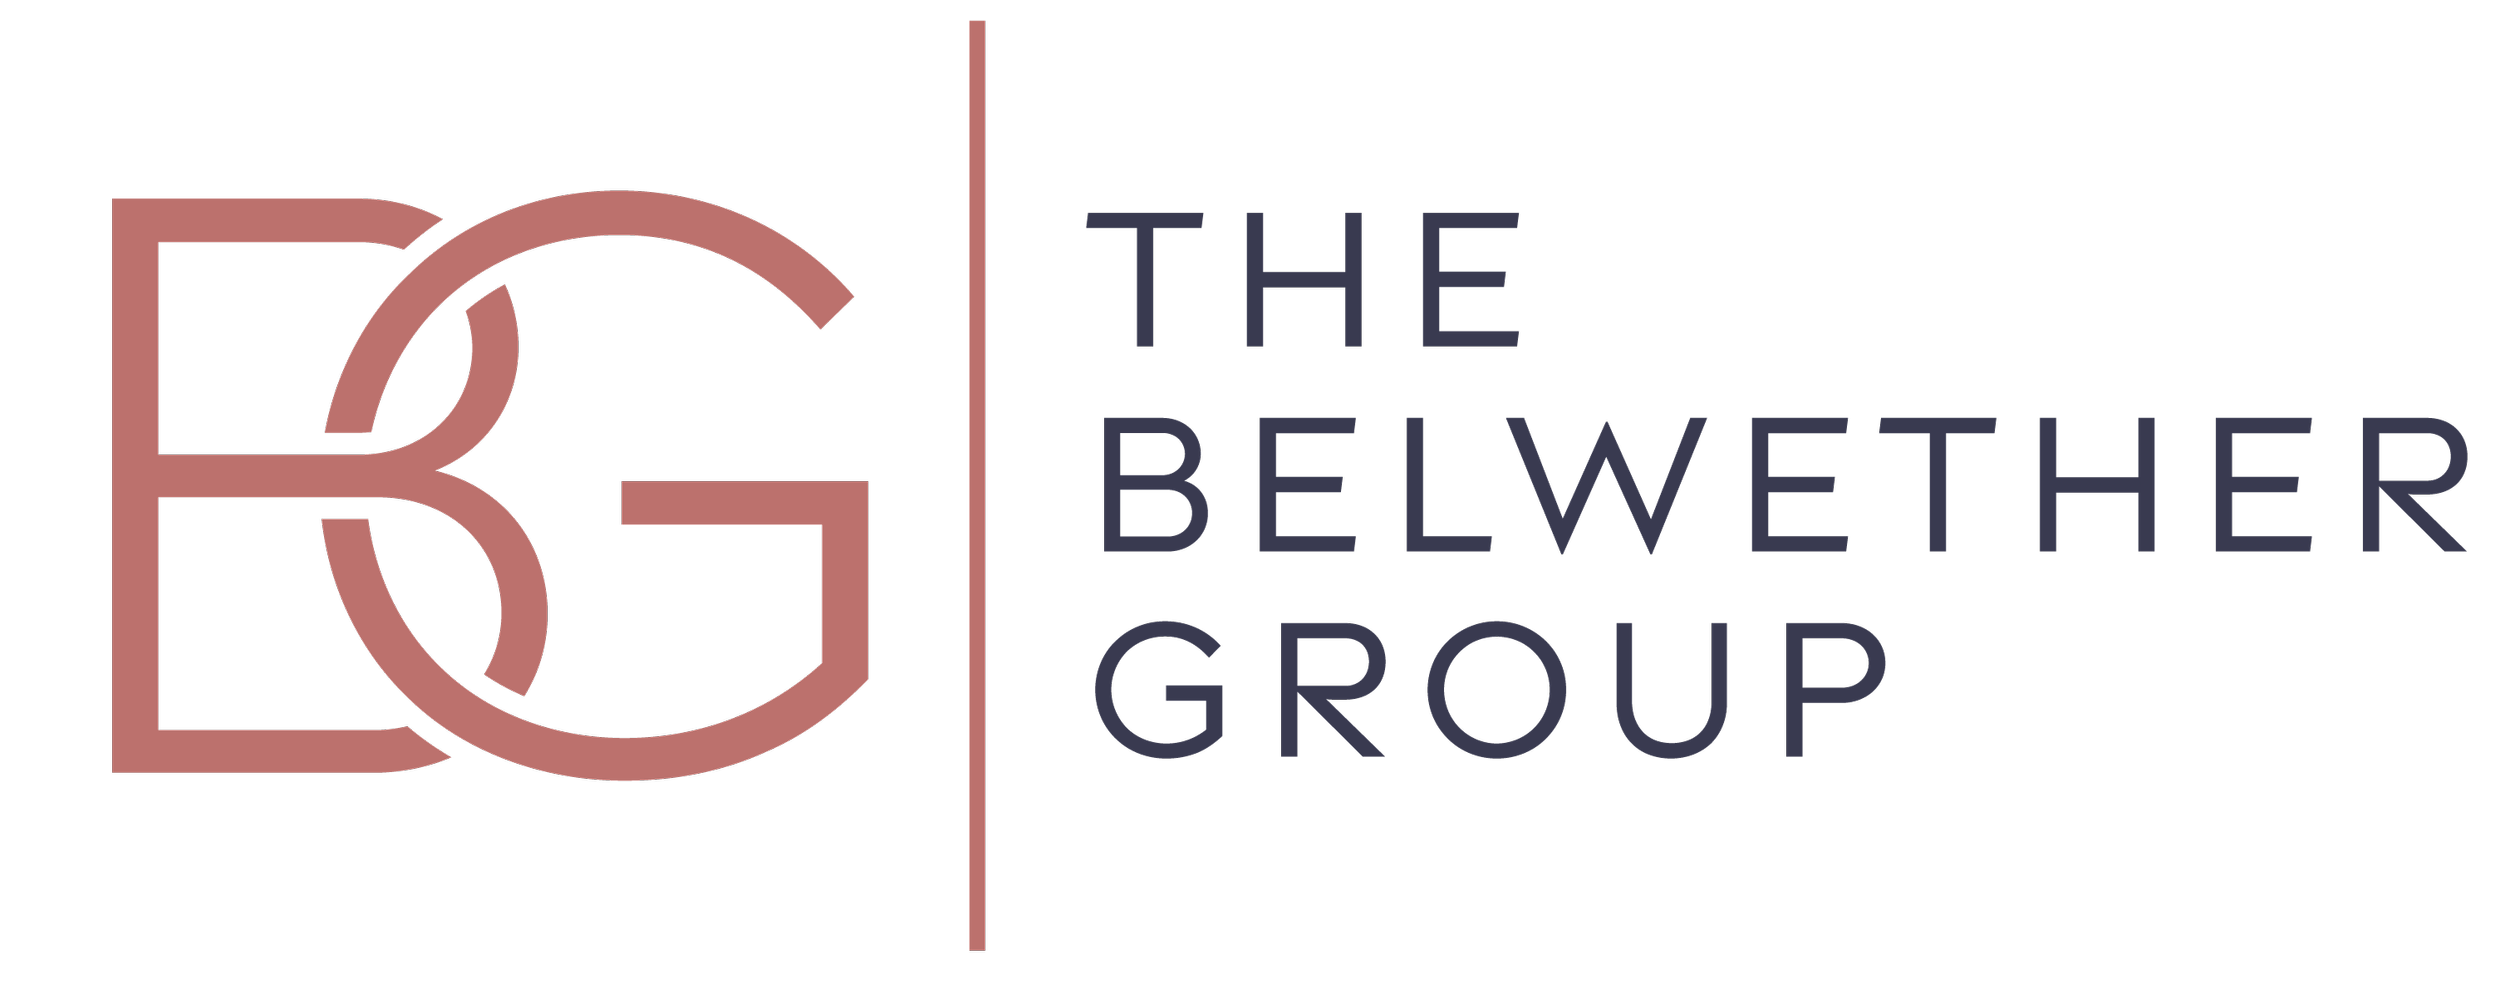 The Belwether Group